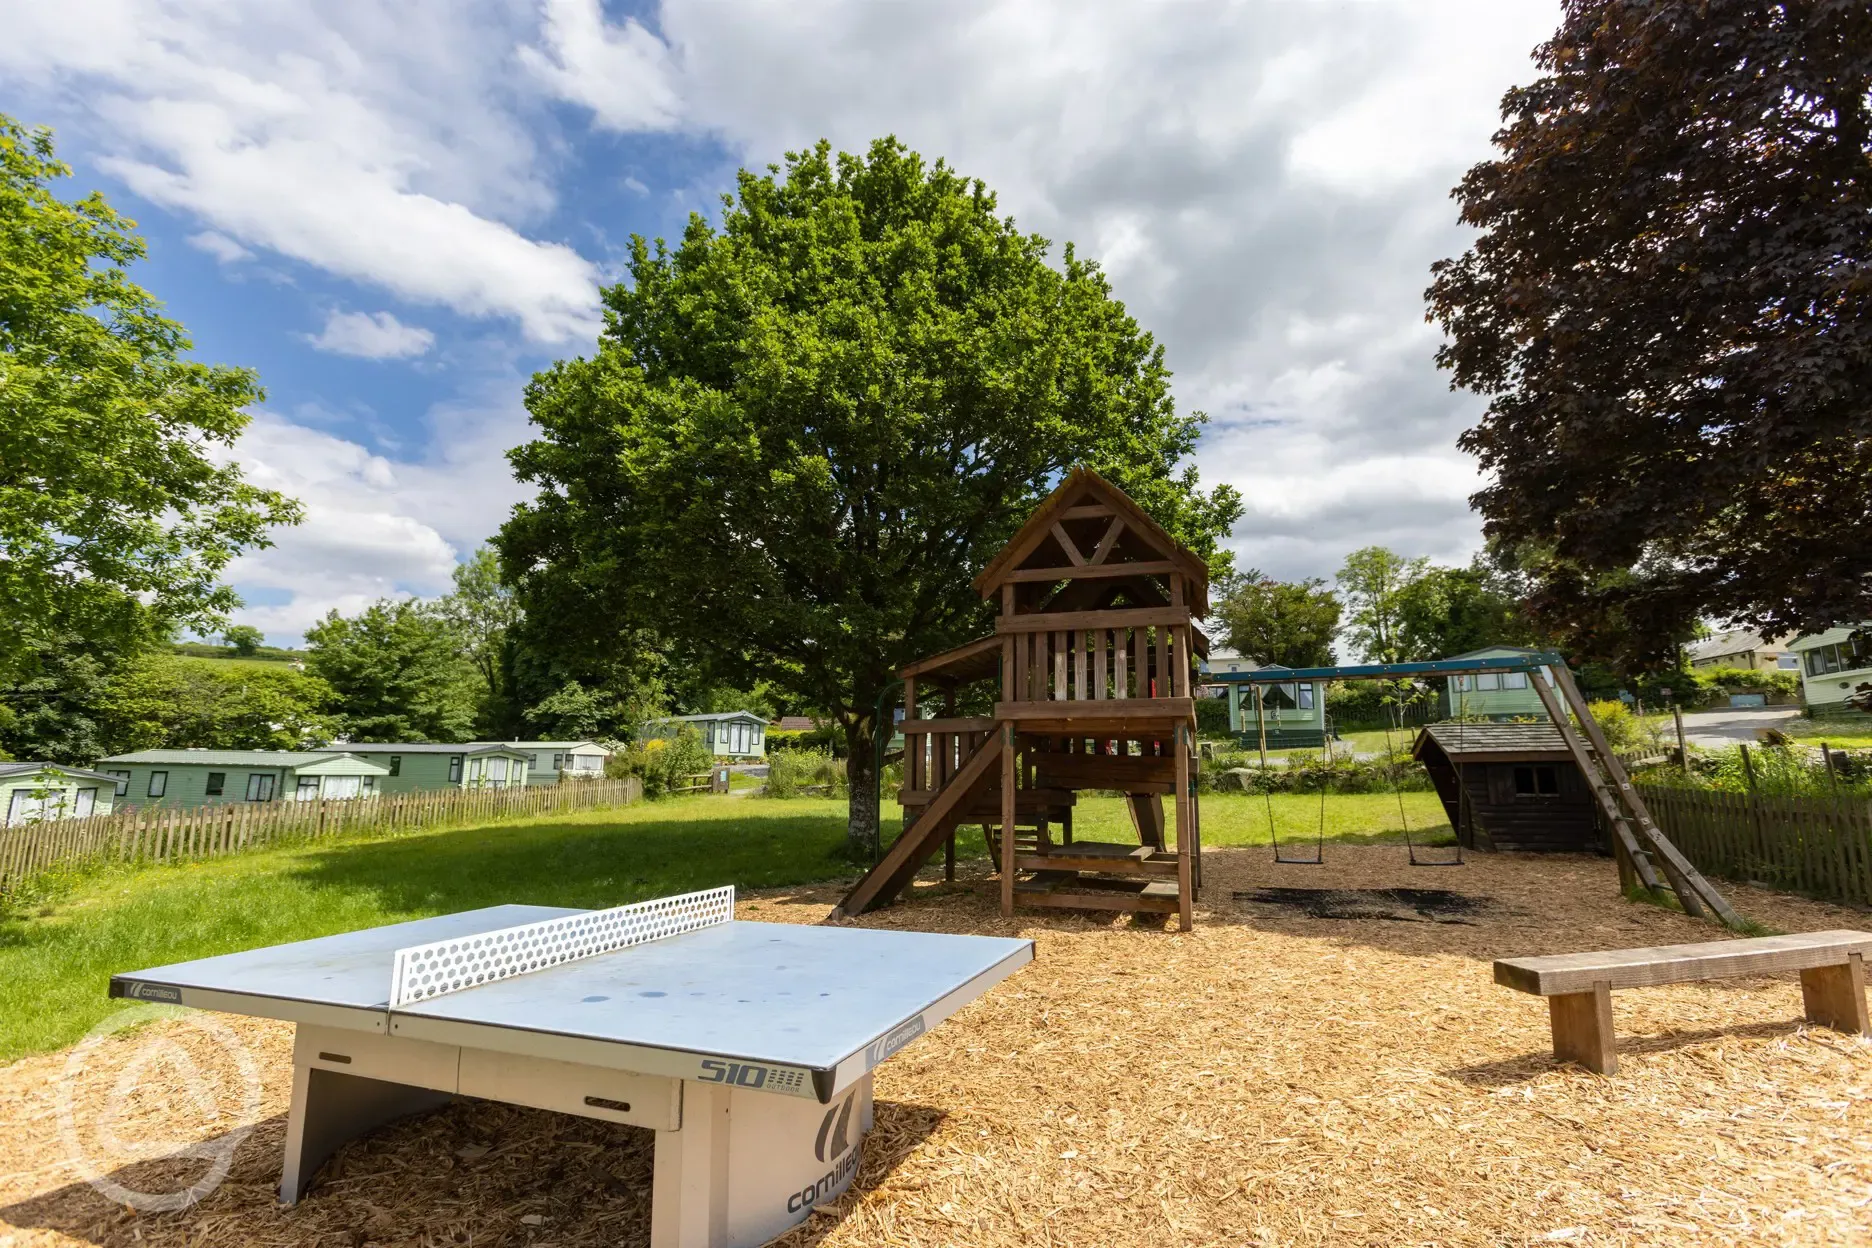 Children's play area with table tennis